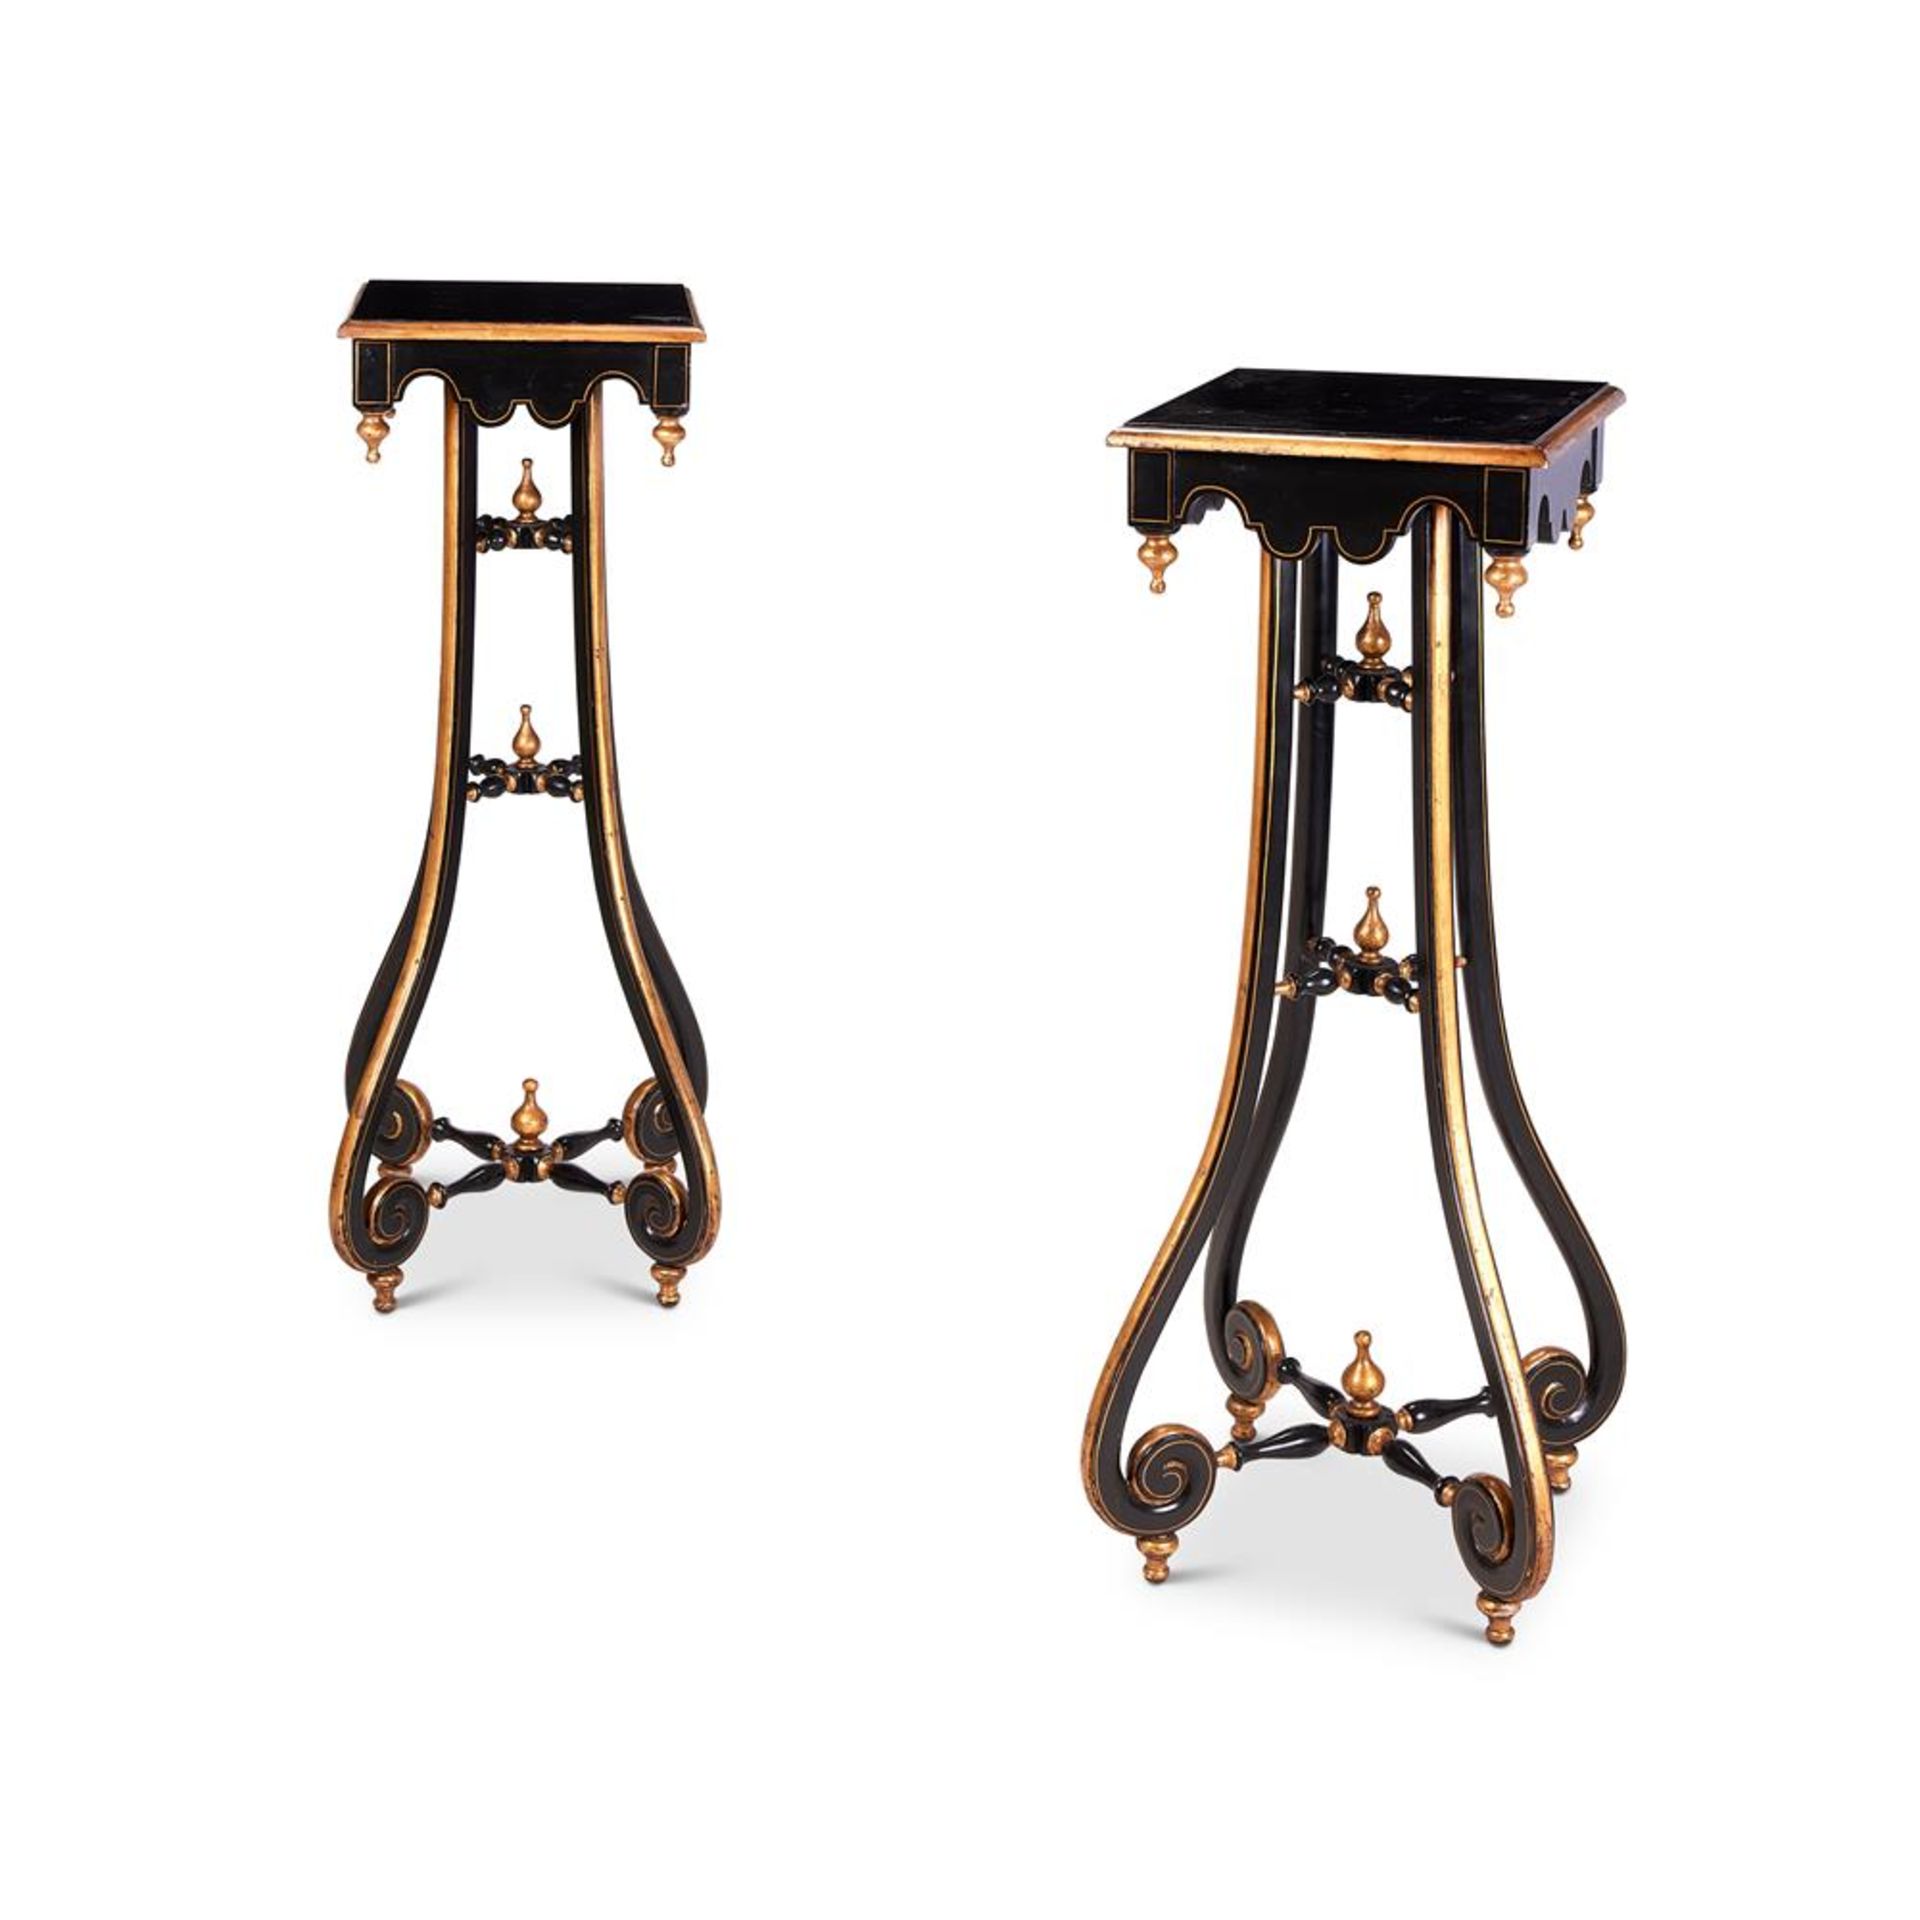 A PAIR OF GILT-DECORATED EBONISED STANDS IN THE NAPOLEON III STYLE, 20TH CENTURY